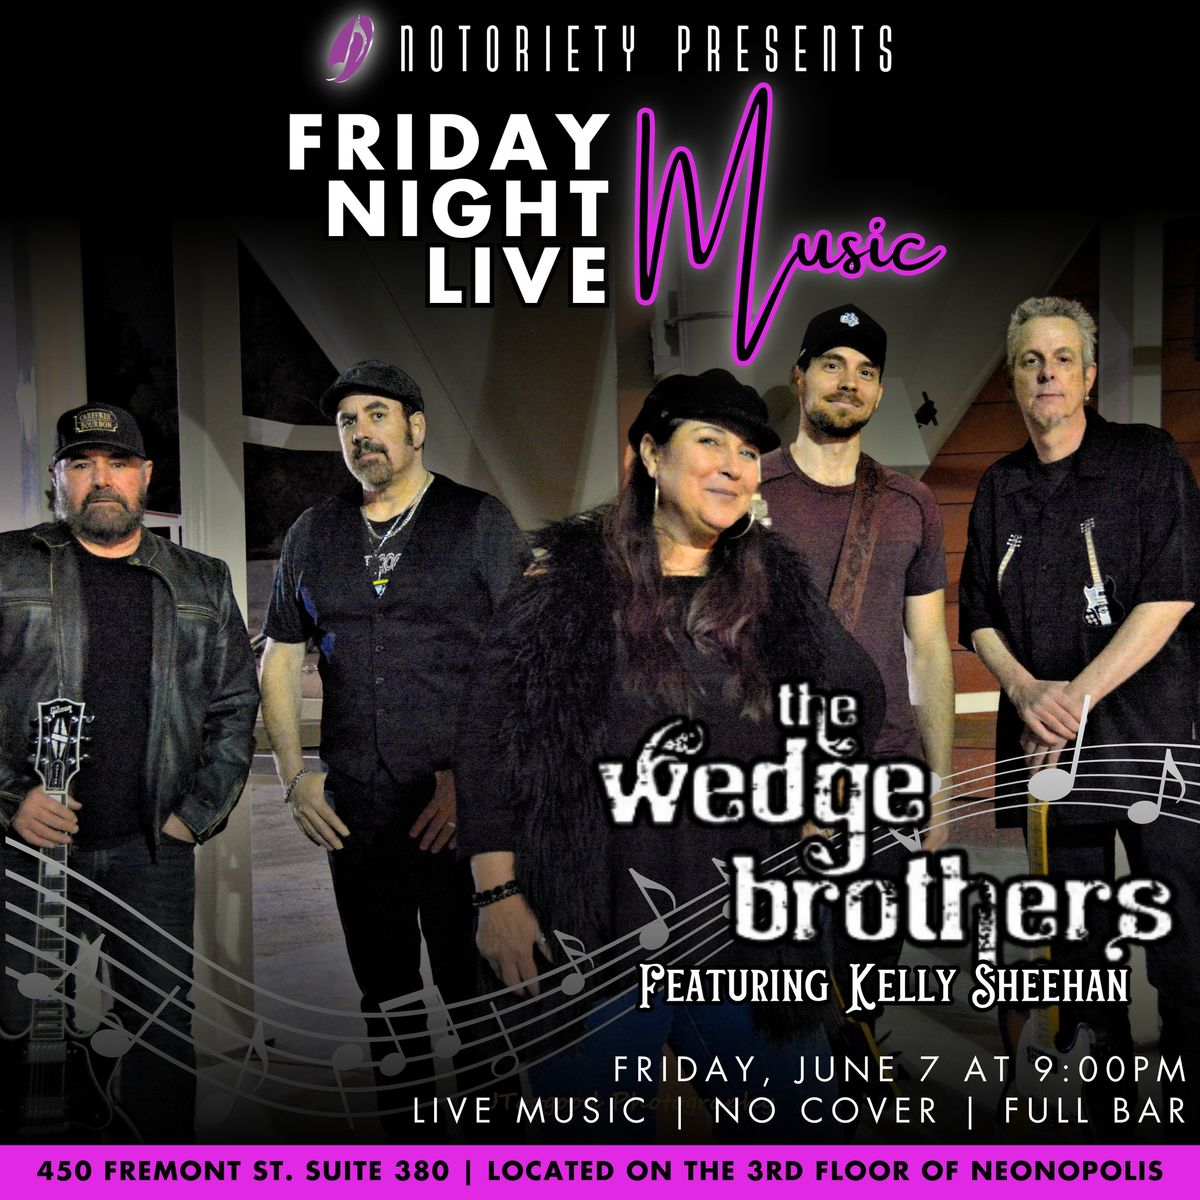 Notoriety's Friday Night Live with The Wedge Brothers & Kelly Sheehan